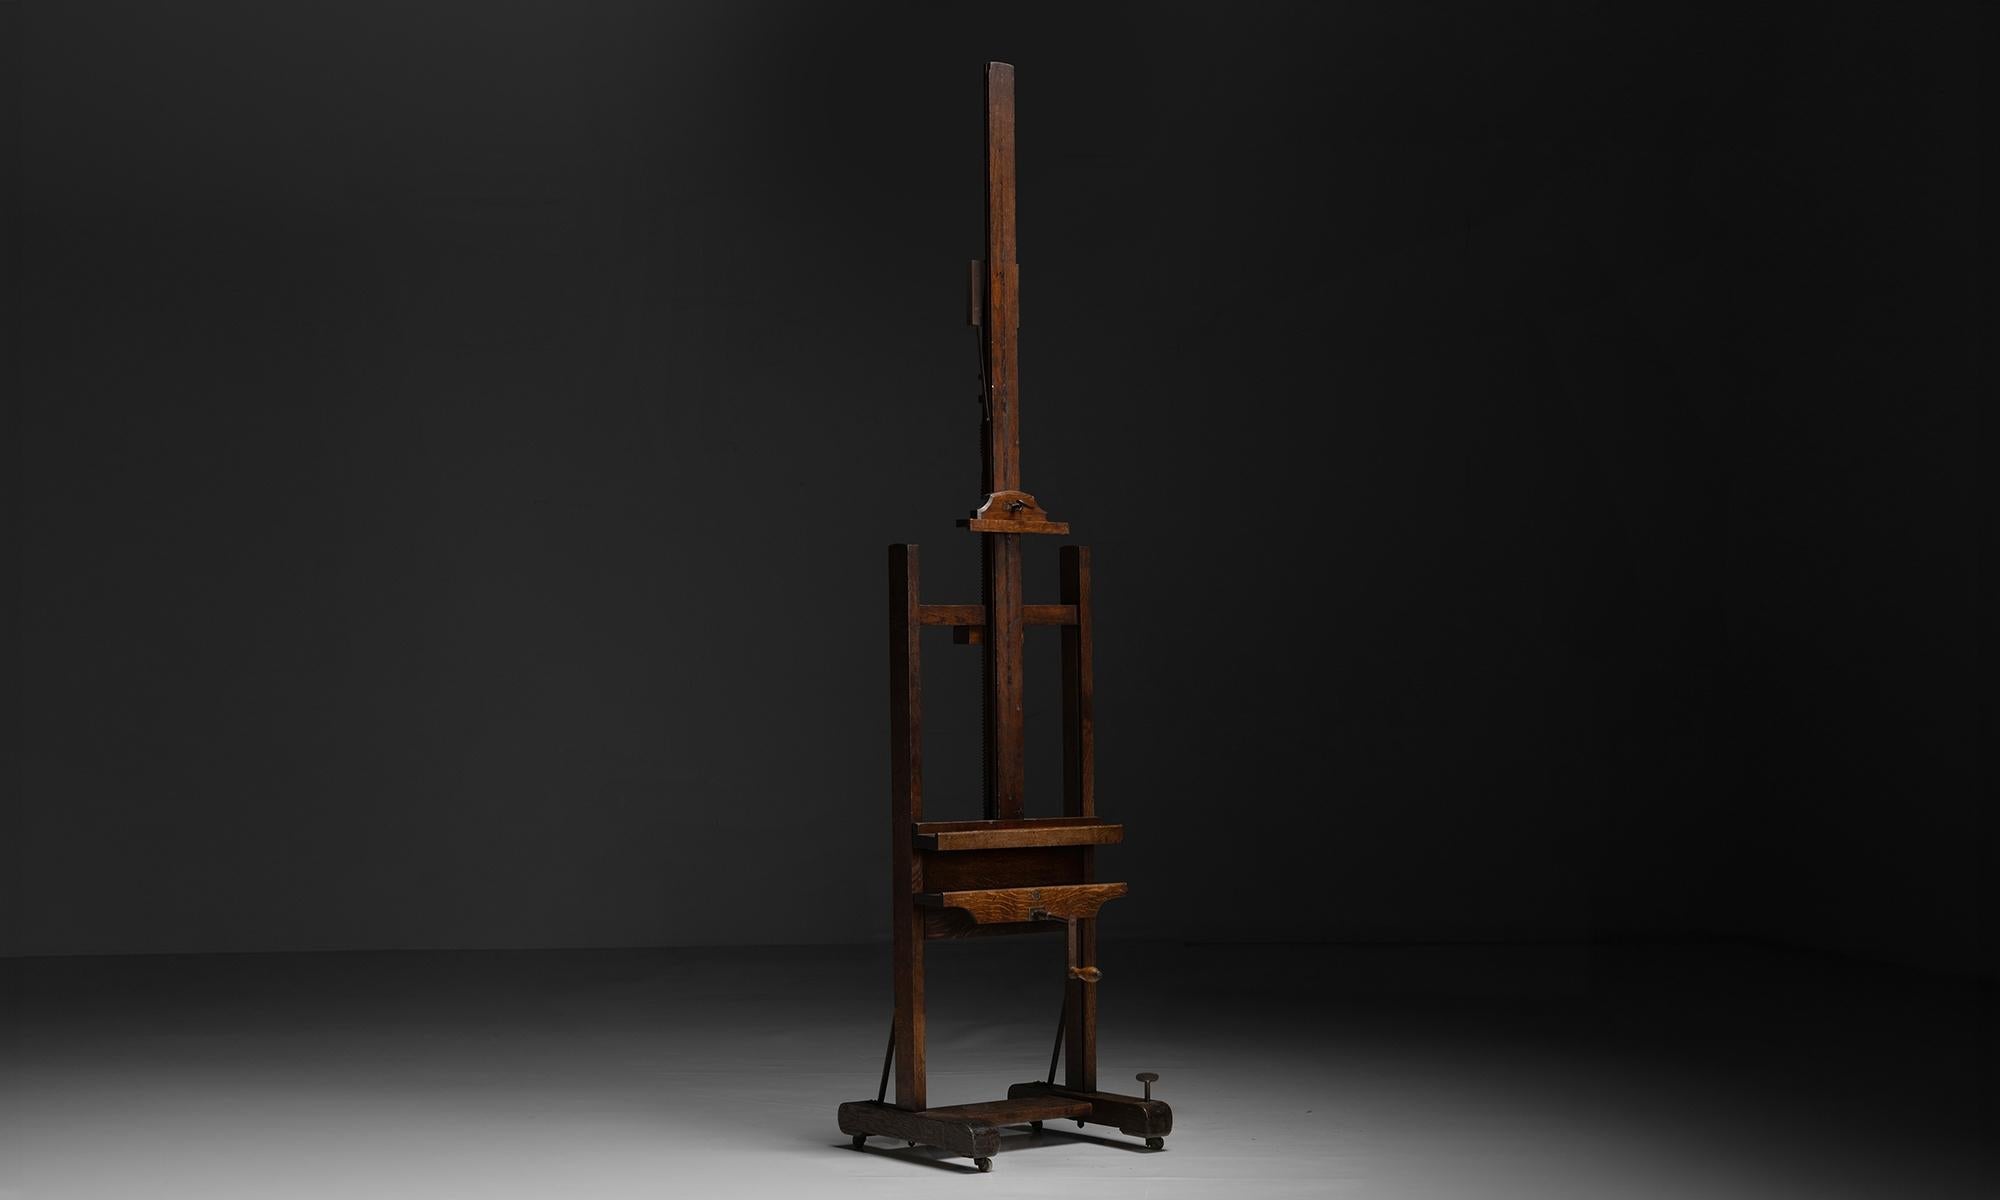 Belgium circa 1890

Wooden easel constructed in oak on wheels with adjustable heights.

22.5”w x 21.5”d x 108”h

(3 of 3)